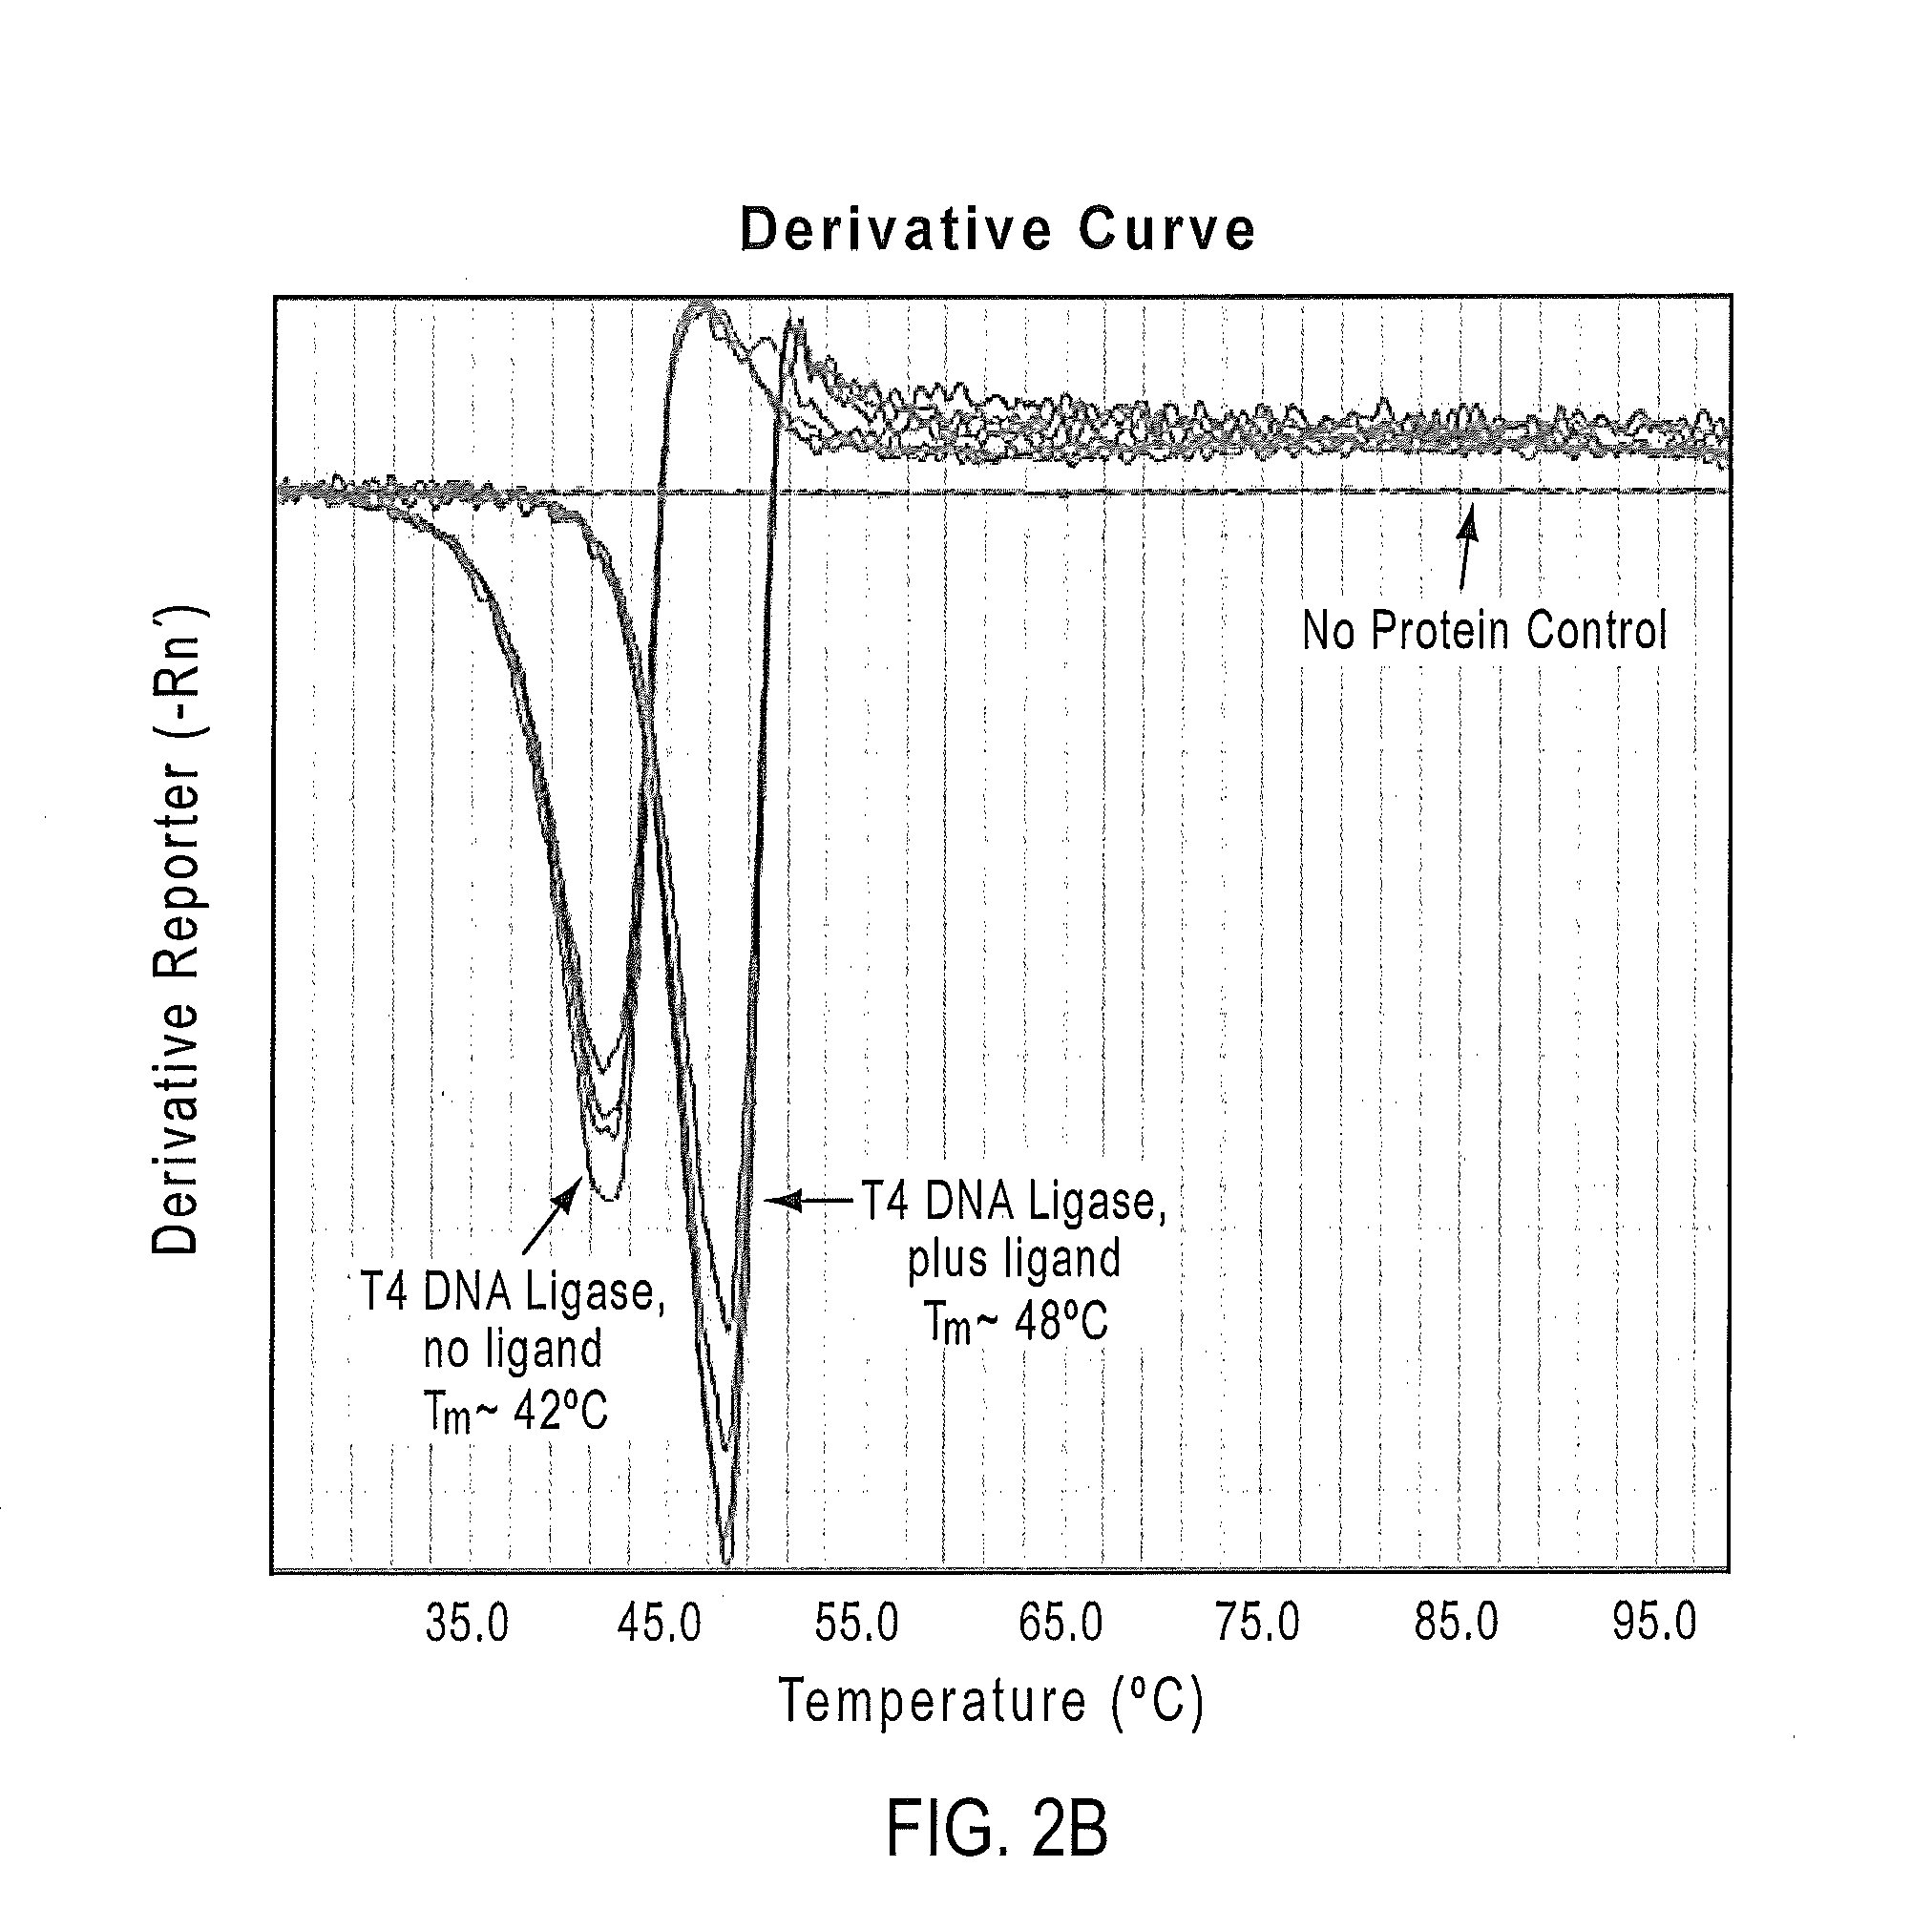 Methods for dye selection for protein melt temperature determinations